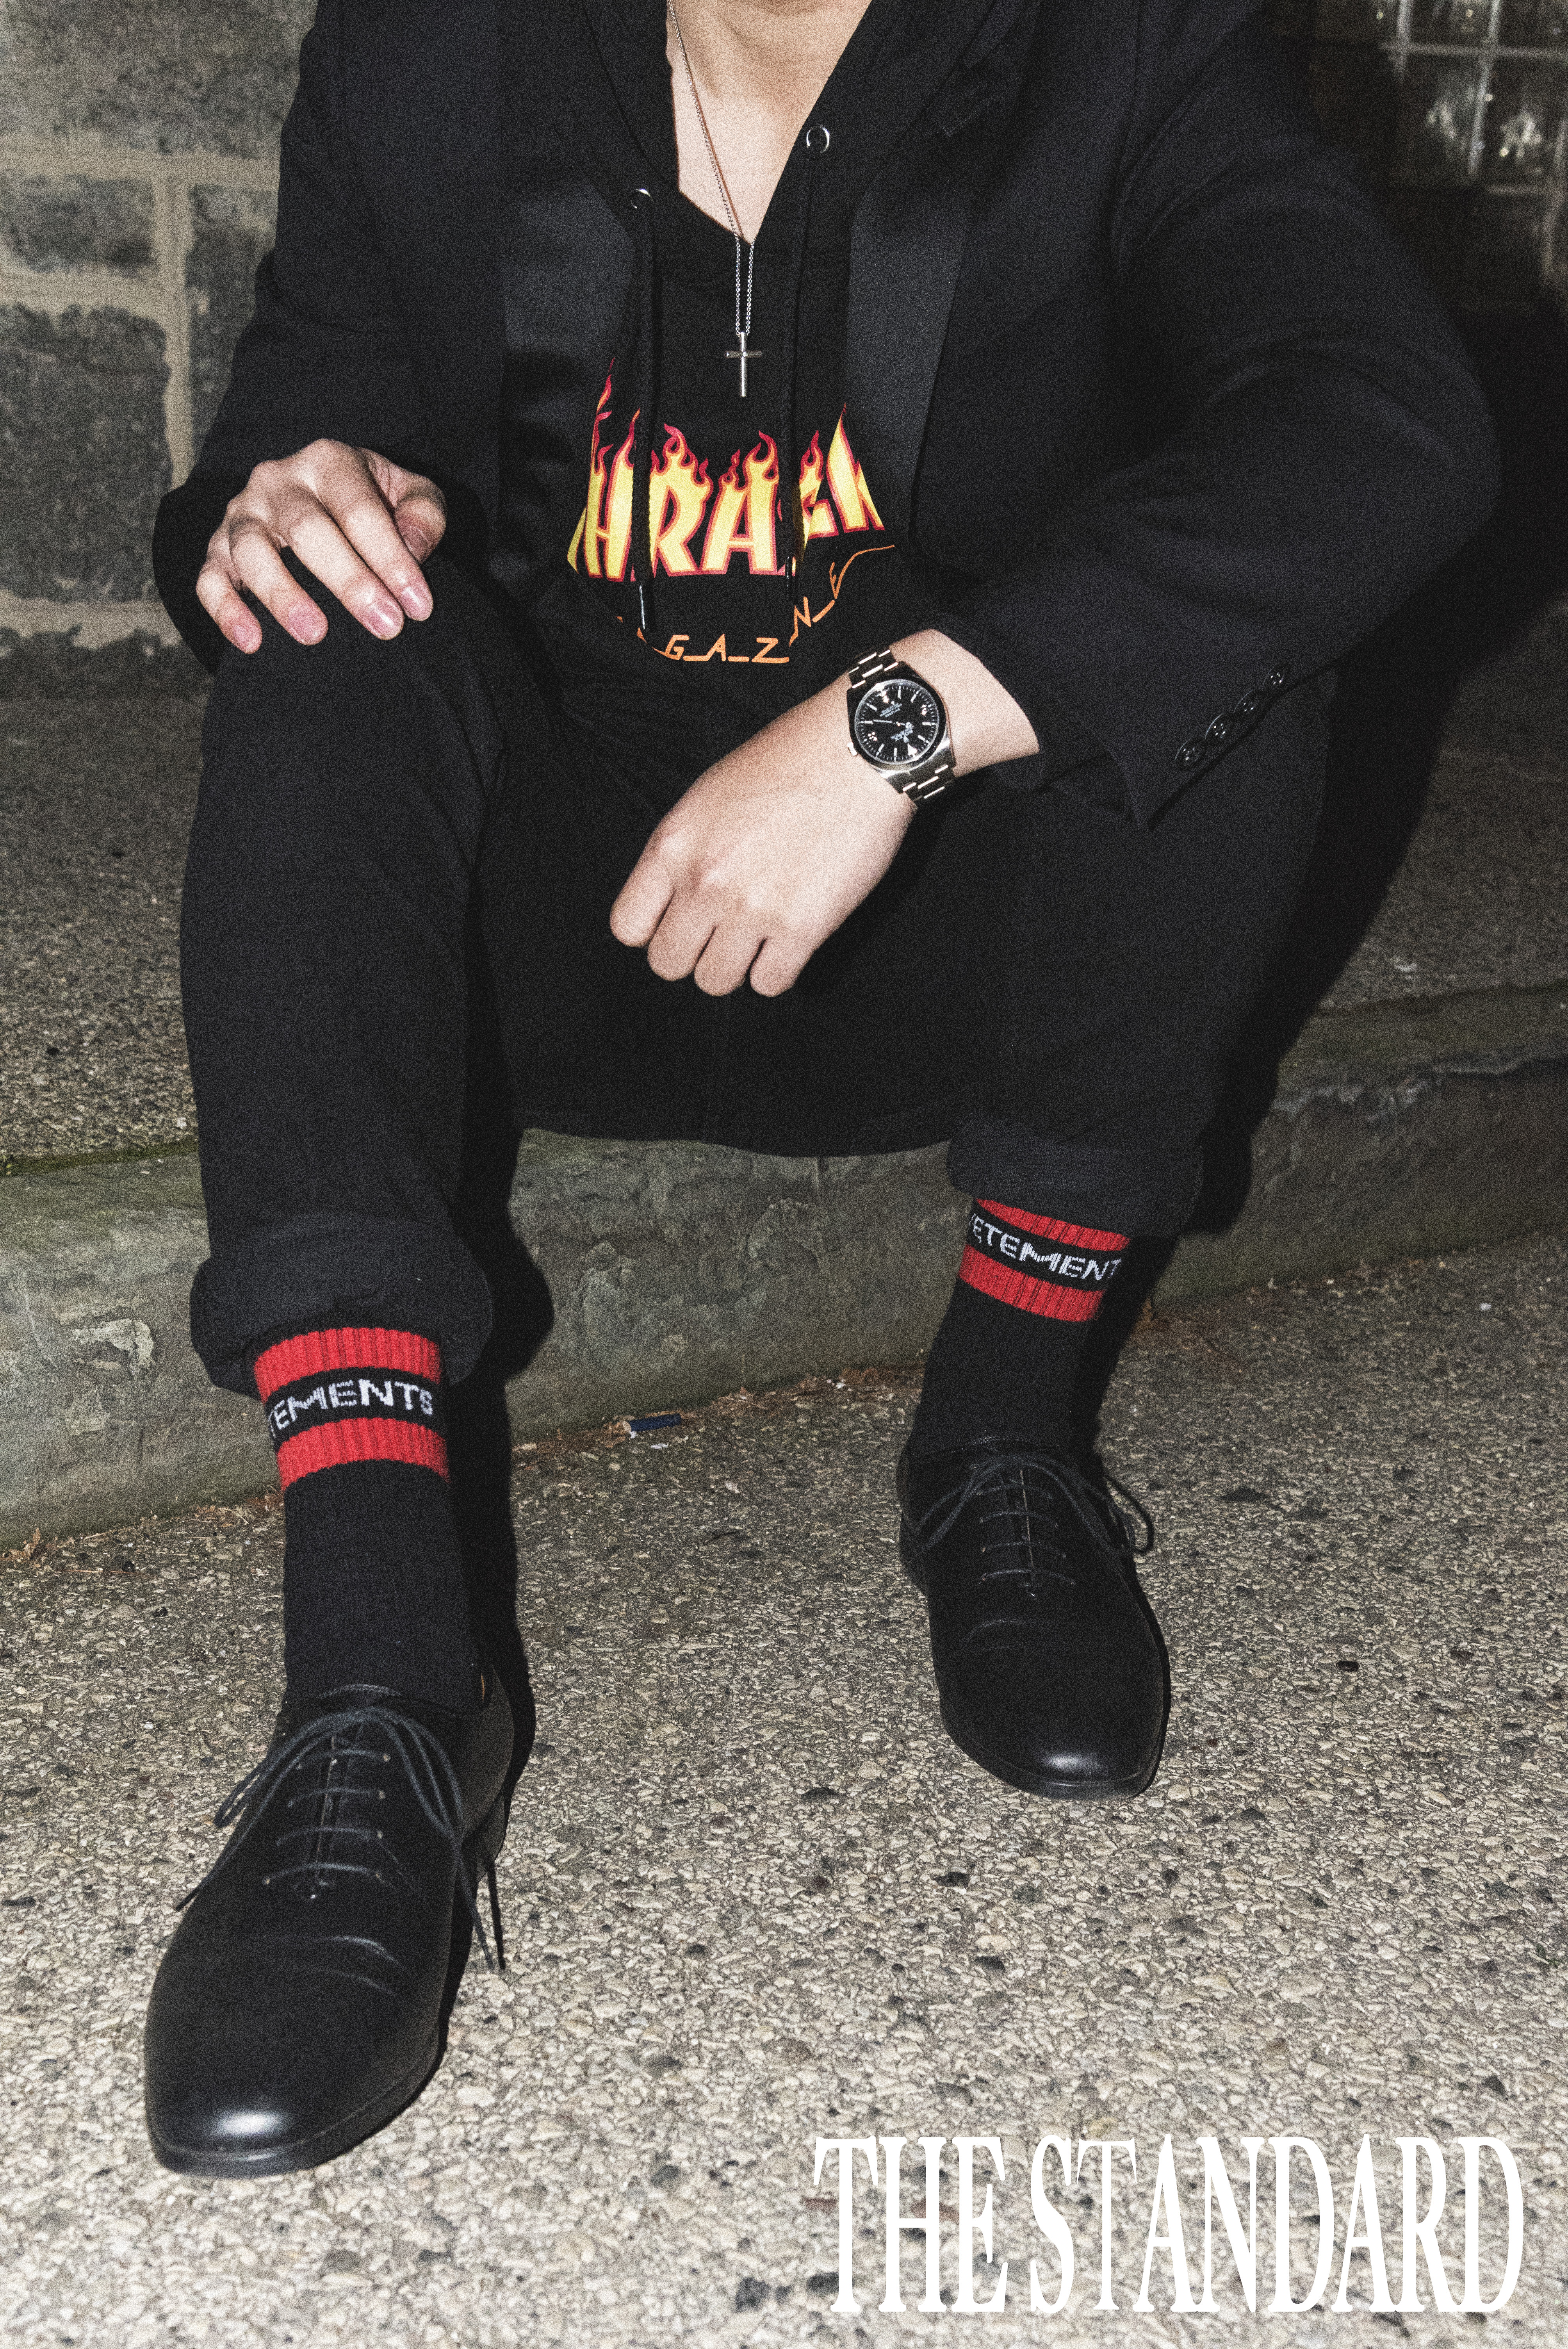 Jessica_Moh_Tony_Ward_Studio_Fashion_Photography_The_Standard_Black_Blazer_Thrasher_Hoodie_Vetements_Socks_Gucci_Shoes_Watch_Outfit_Words_In_Corner